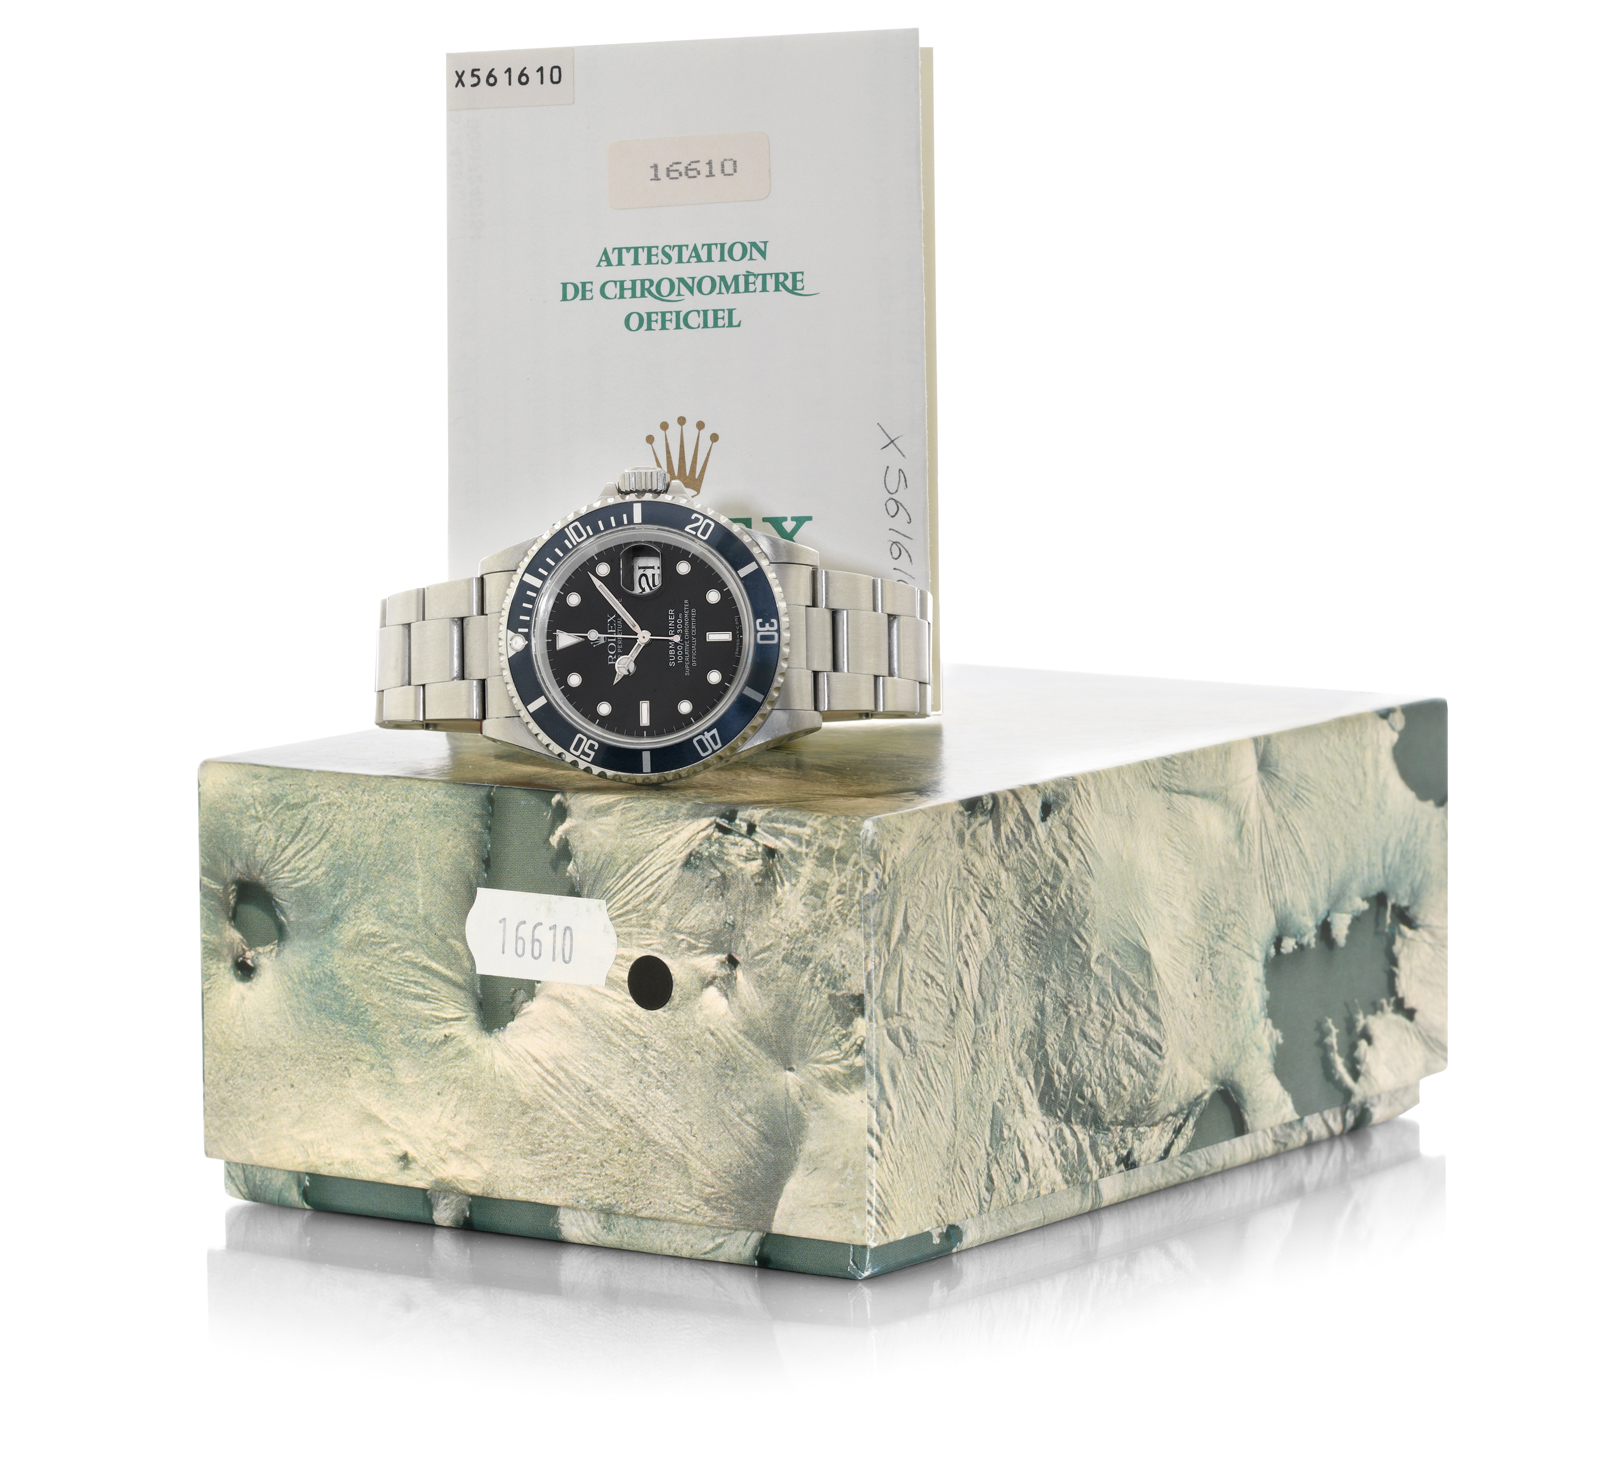 ROLEX OYSTER PERPETUAL DATE SUBMARINER REF. 16610 DEL 1991.